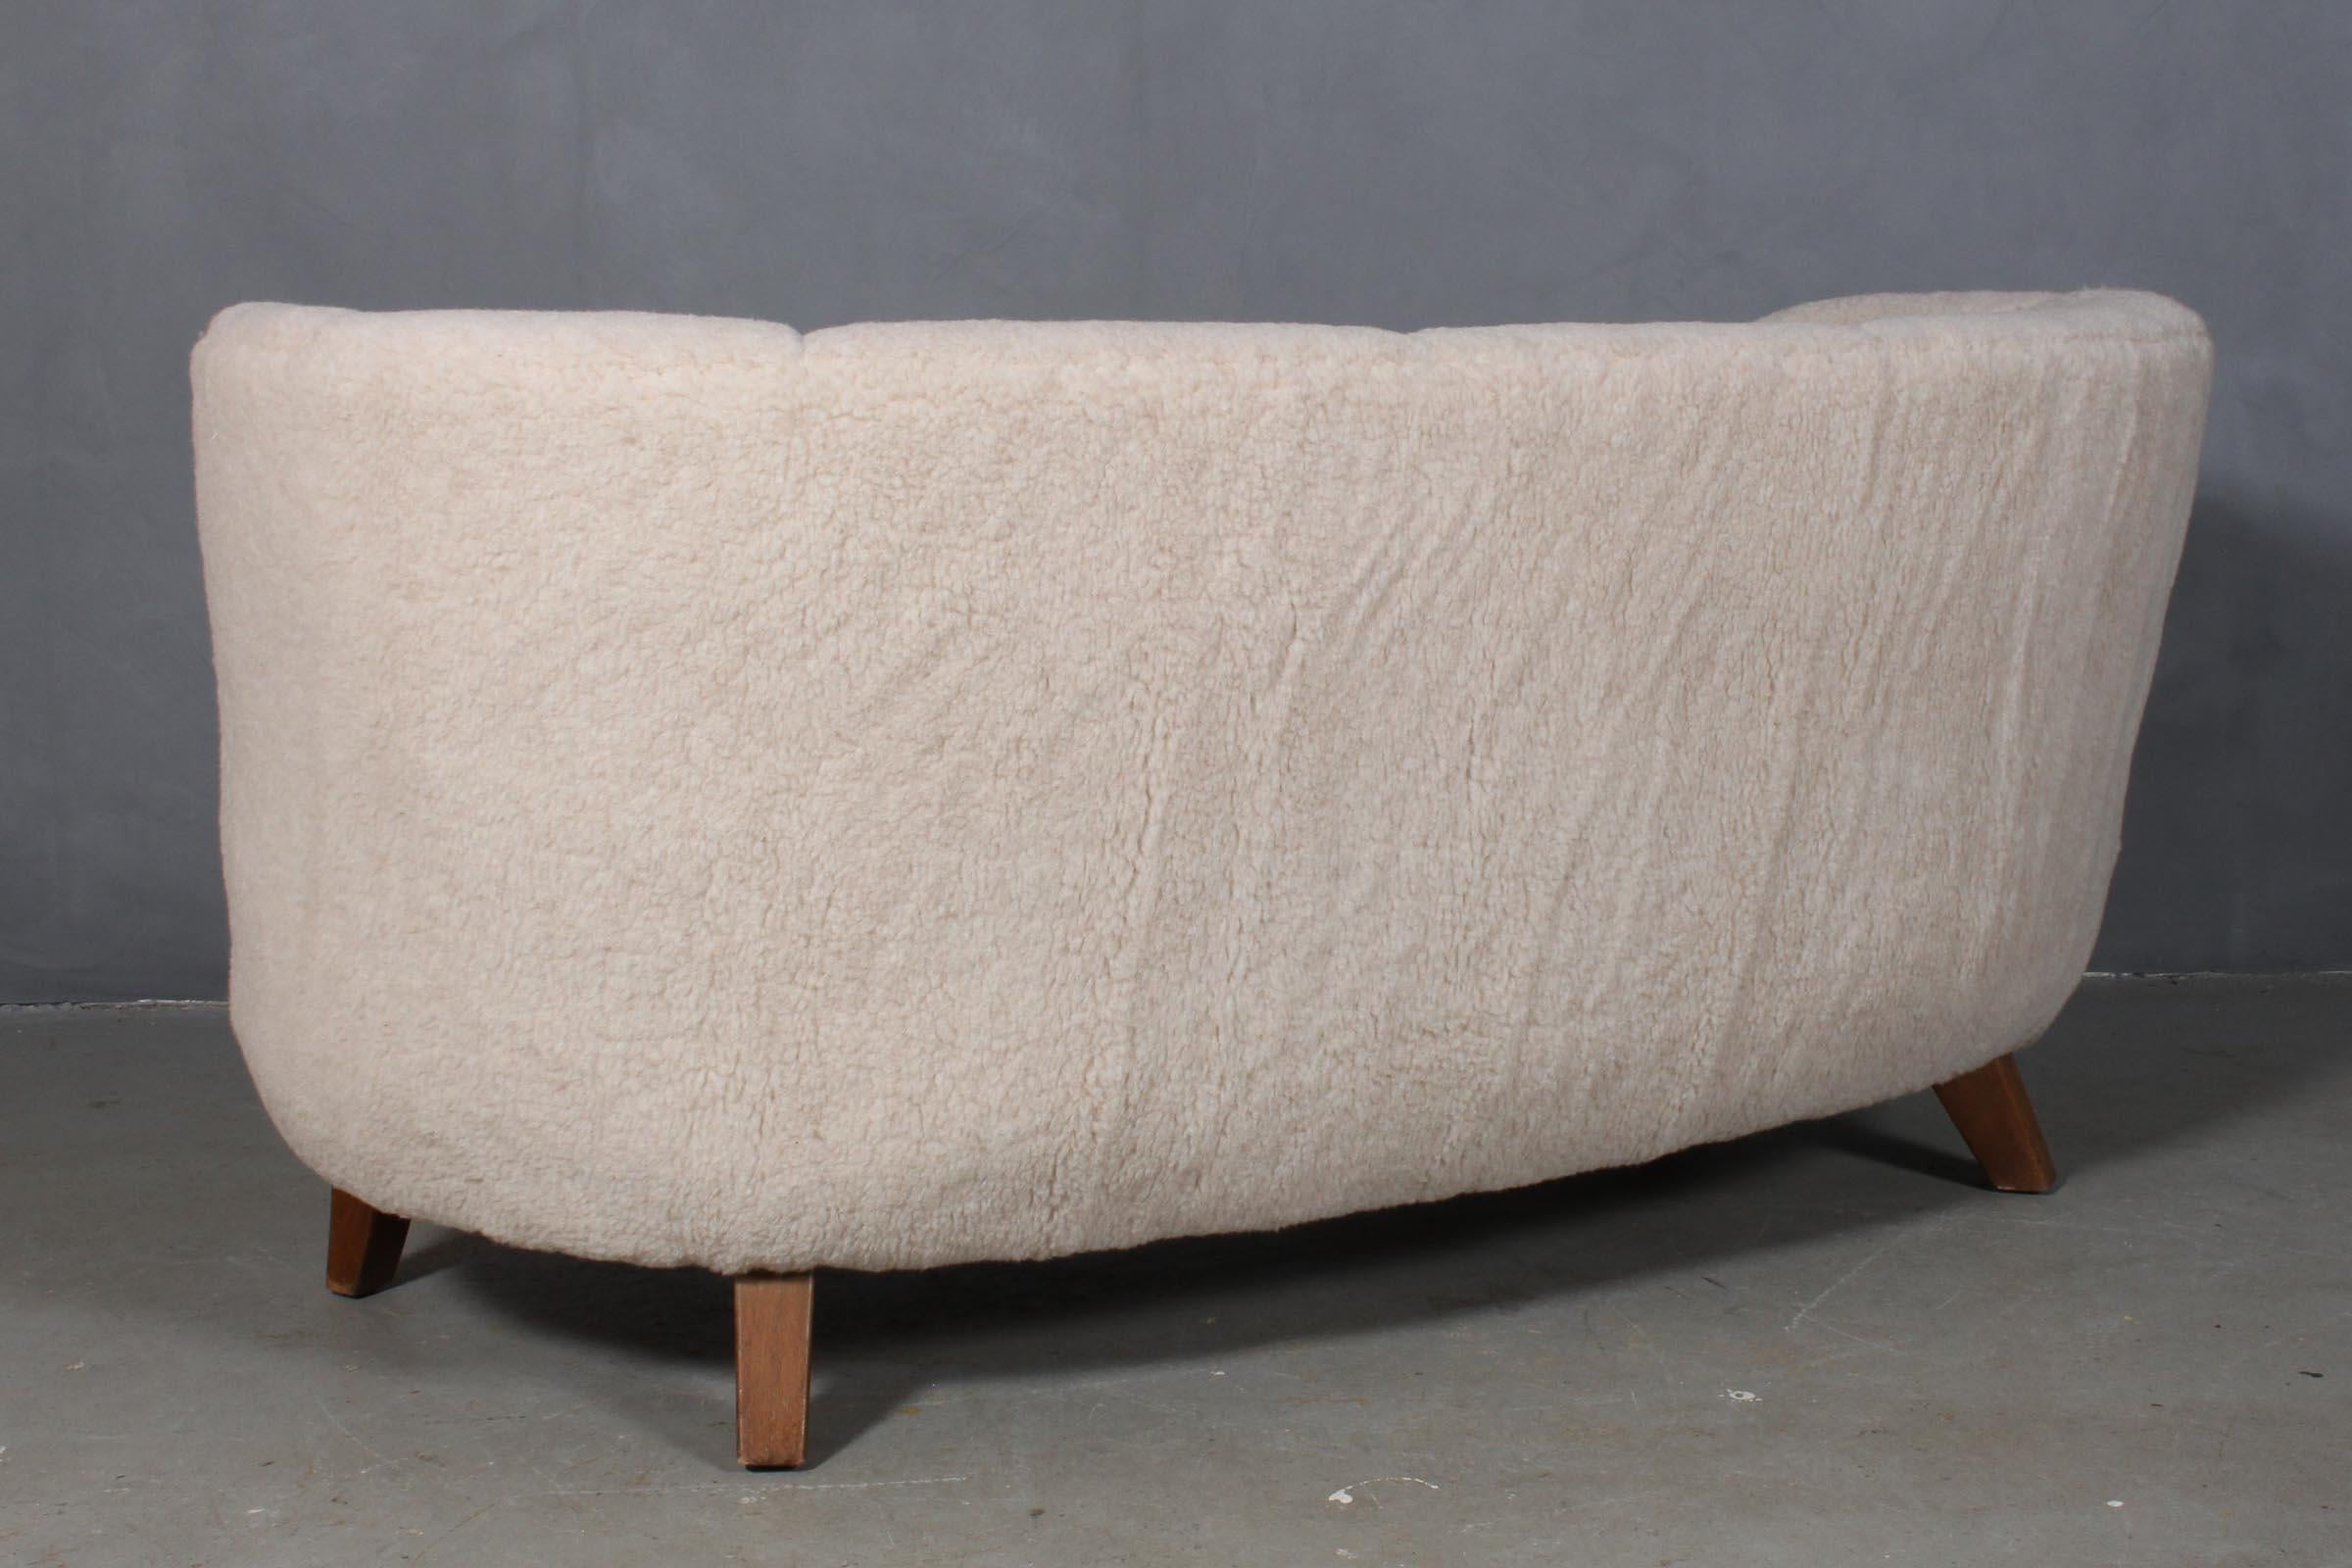 Danish cabinetmaker two-seat sofa new upholstered with lambwool.

Legs of beech

Made in the 1940s.